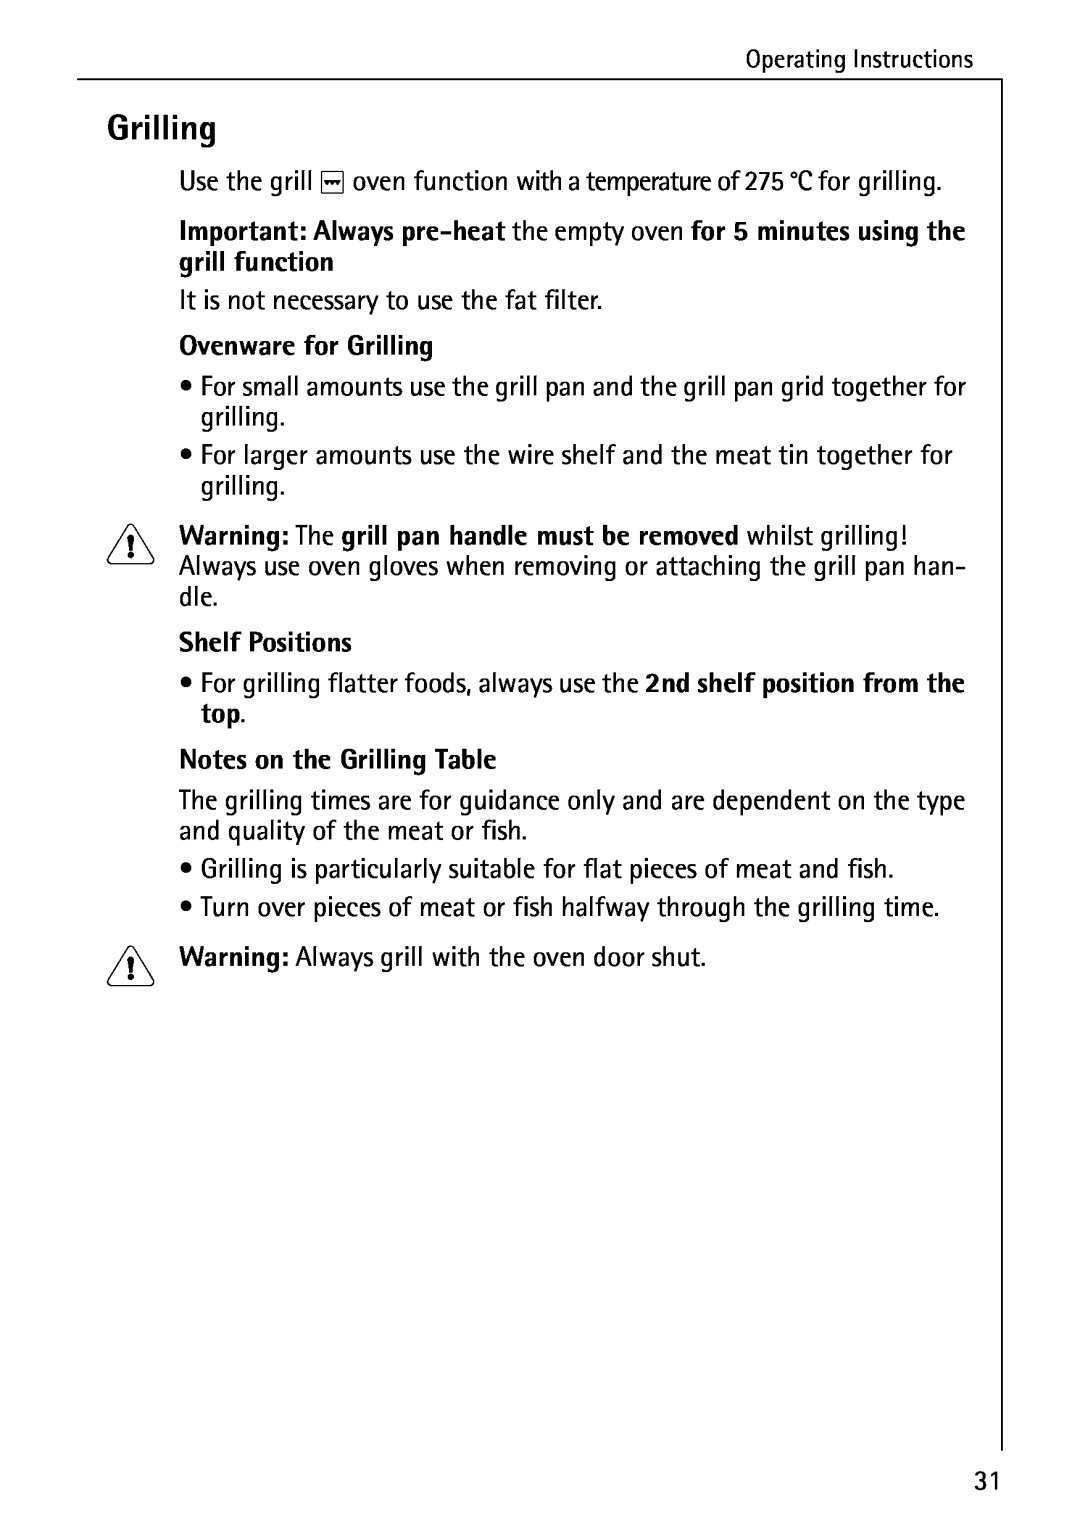 AEG B 2100 operating instructions Ovenware for Grilling, Notes on the Grilling Table, Shelf Positions 